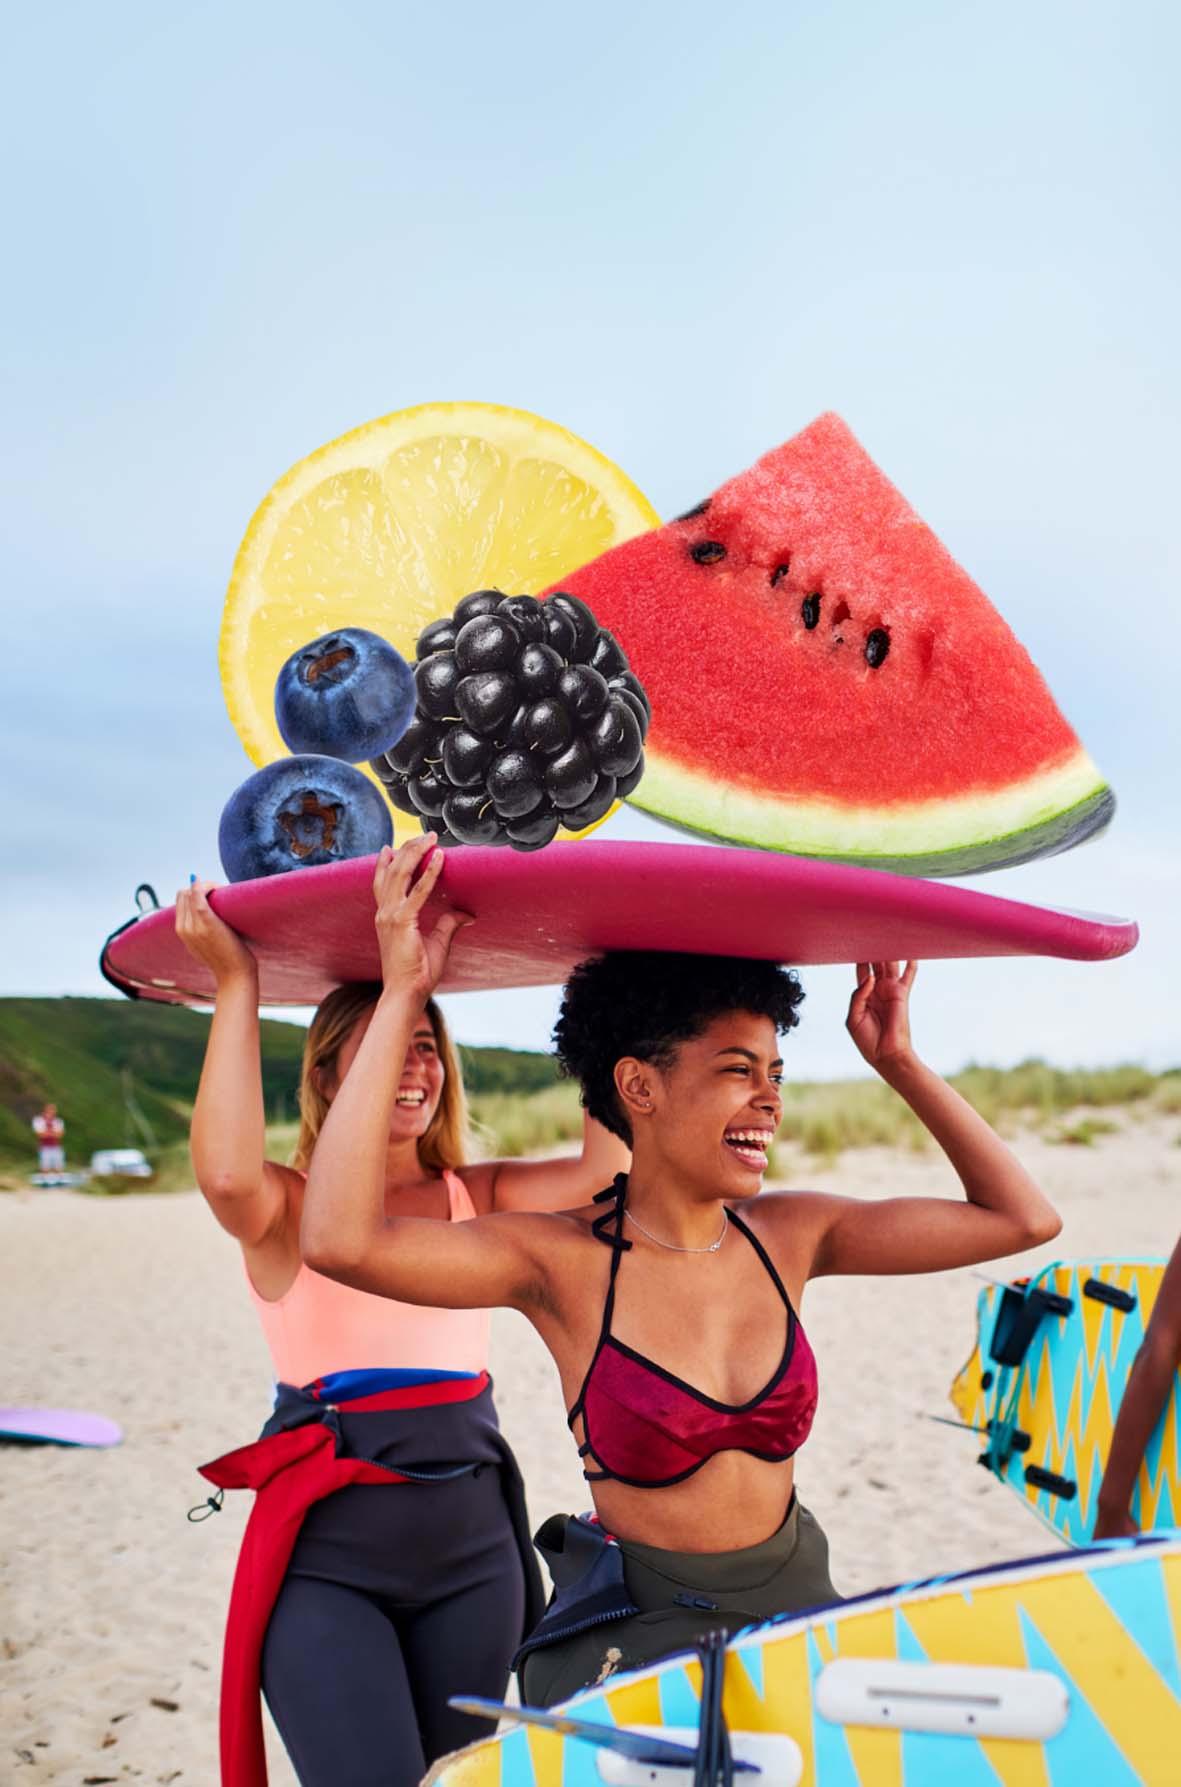 A photo of two woman carrying a surf board above their head that balances fruit graphics on top.